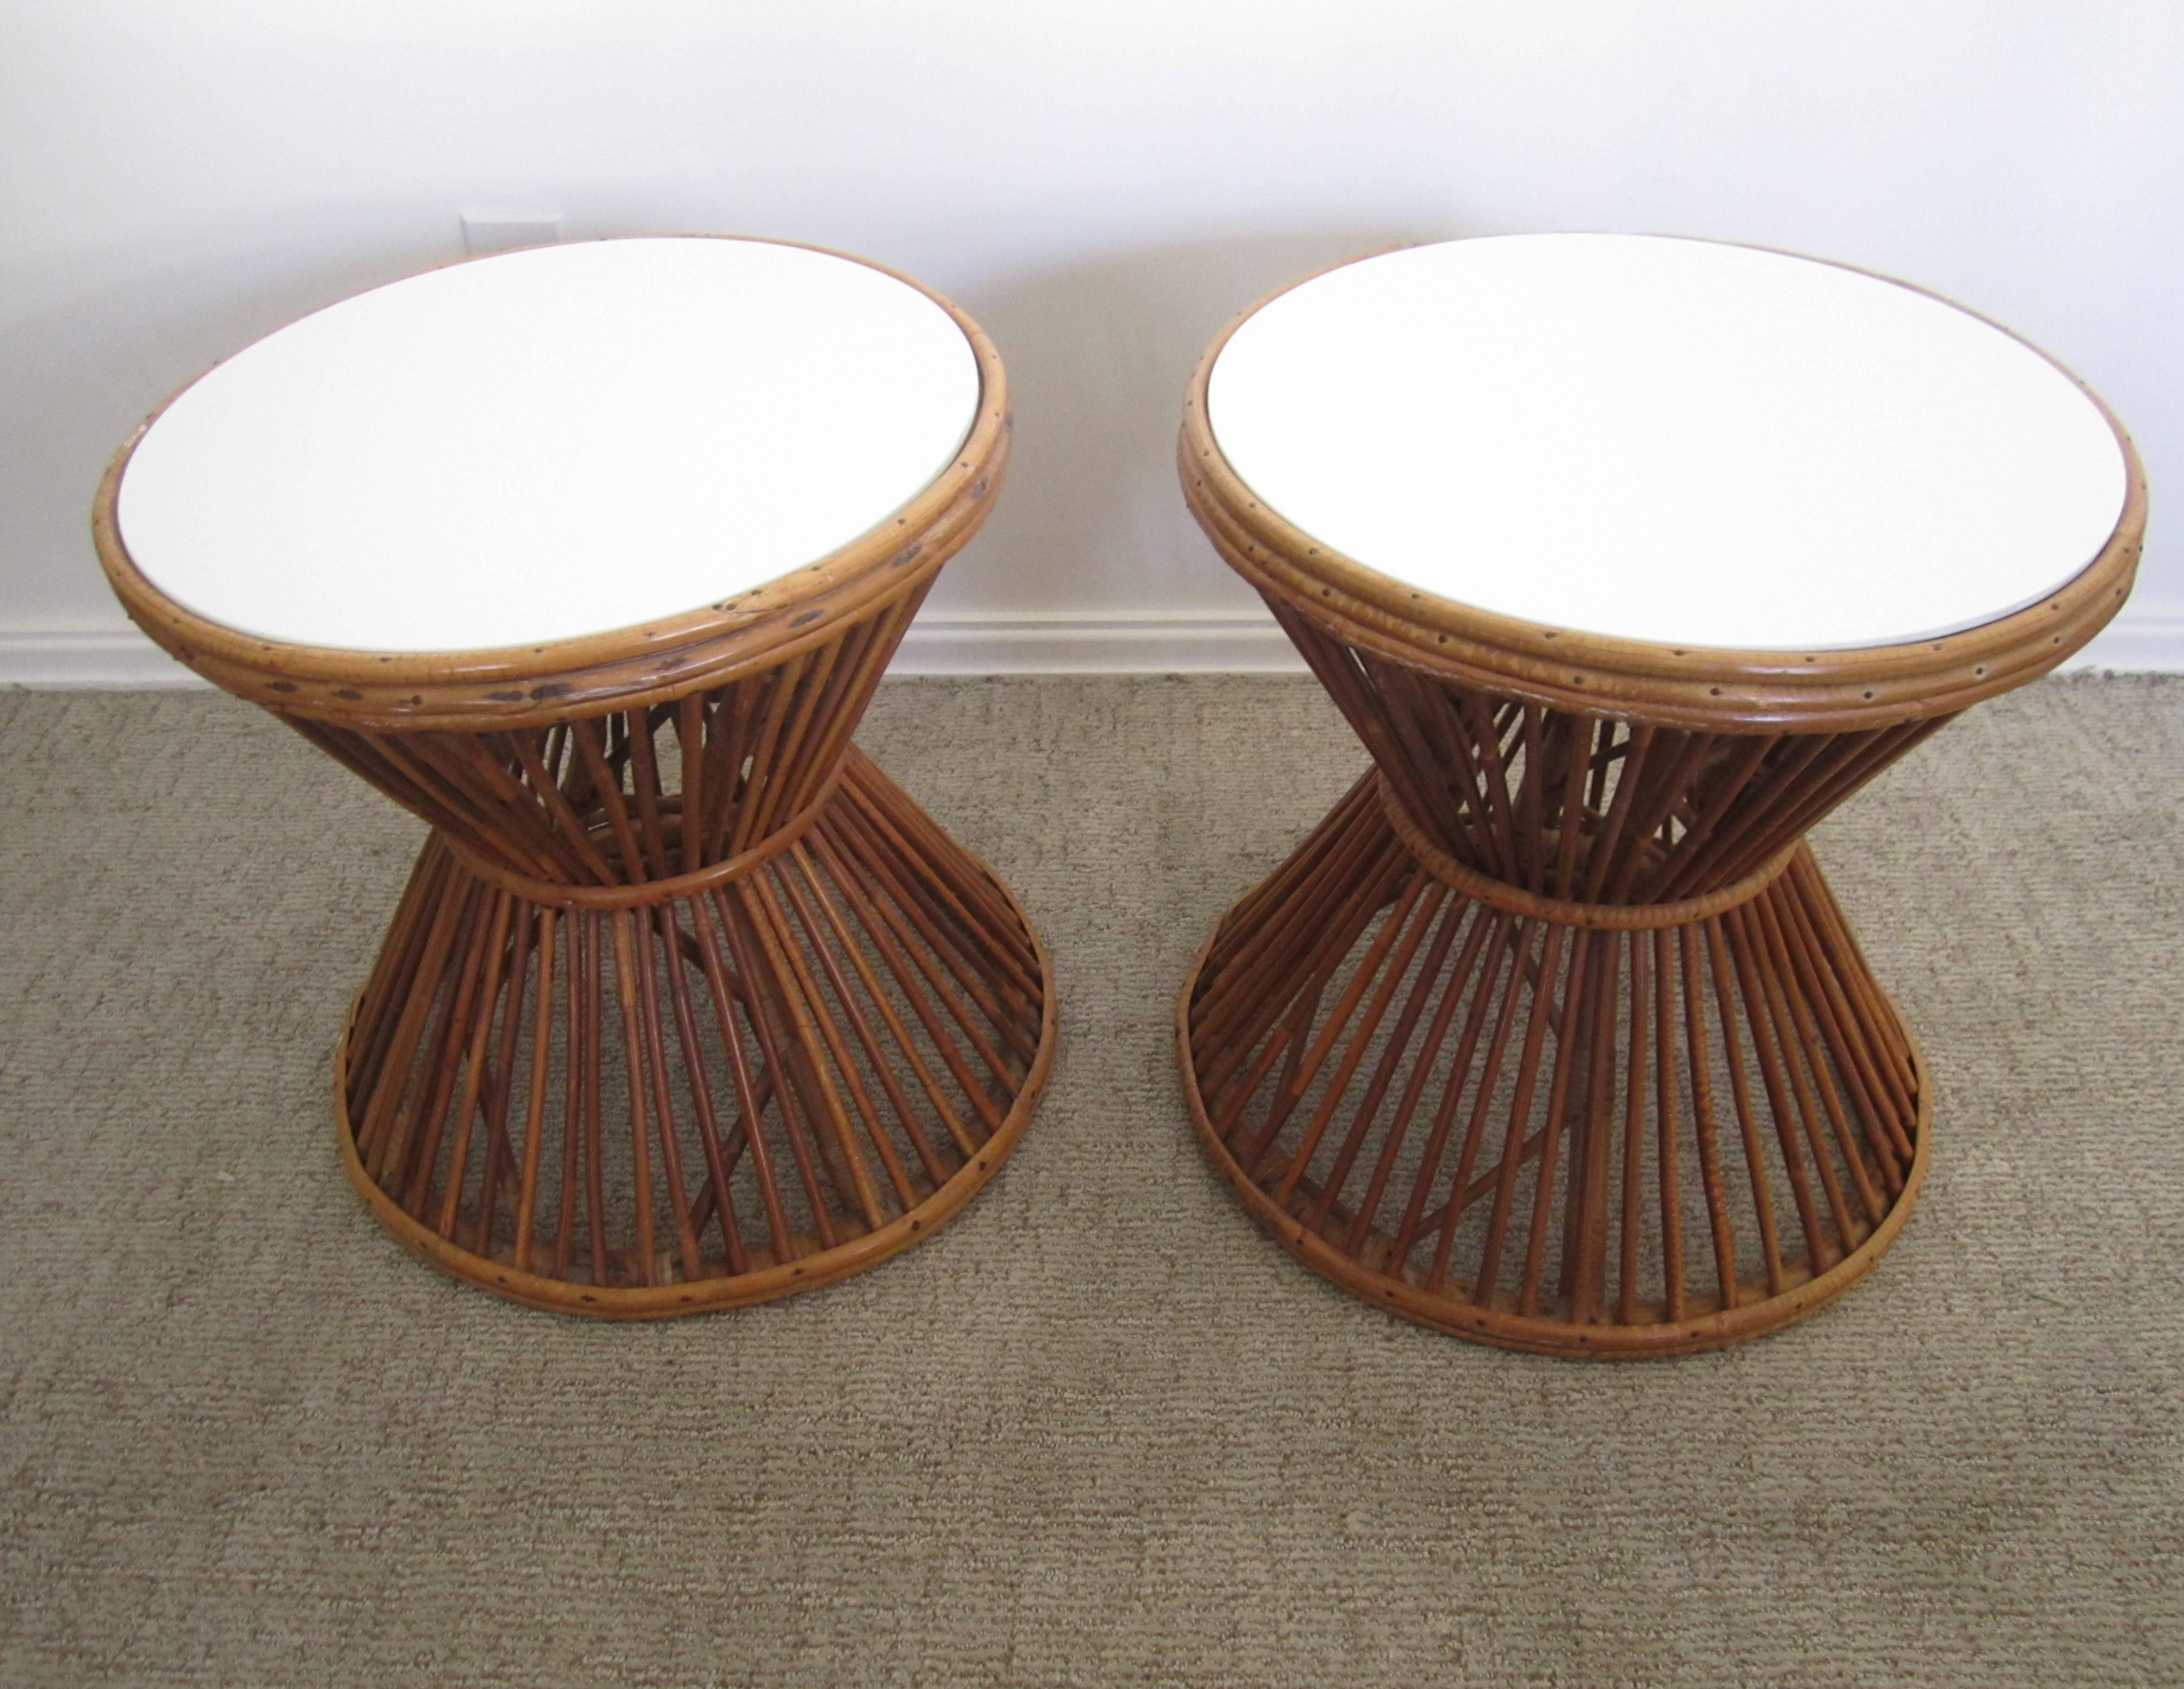 A vintage pair of Franco Albini (1905-1977) style rattan end or side tables with white opaque glass tops. Tables have an 'hourglass' design with inset white opaque round glass tops. Tables can be used as side, end, or cocktail tables. Circa, 1960s -